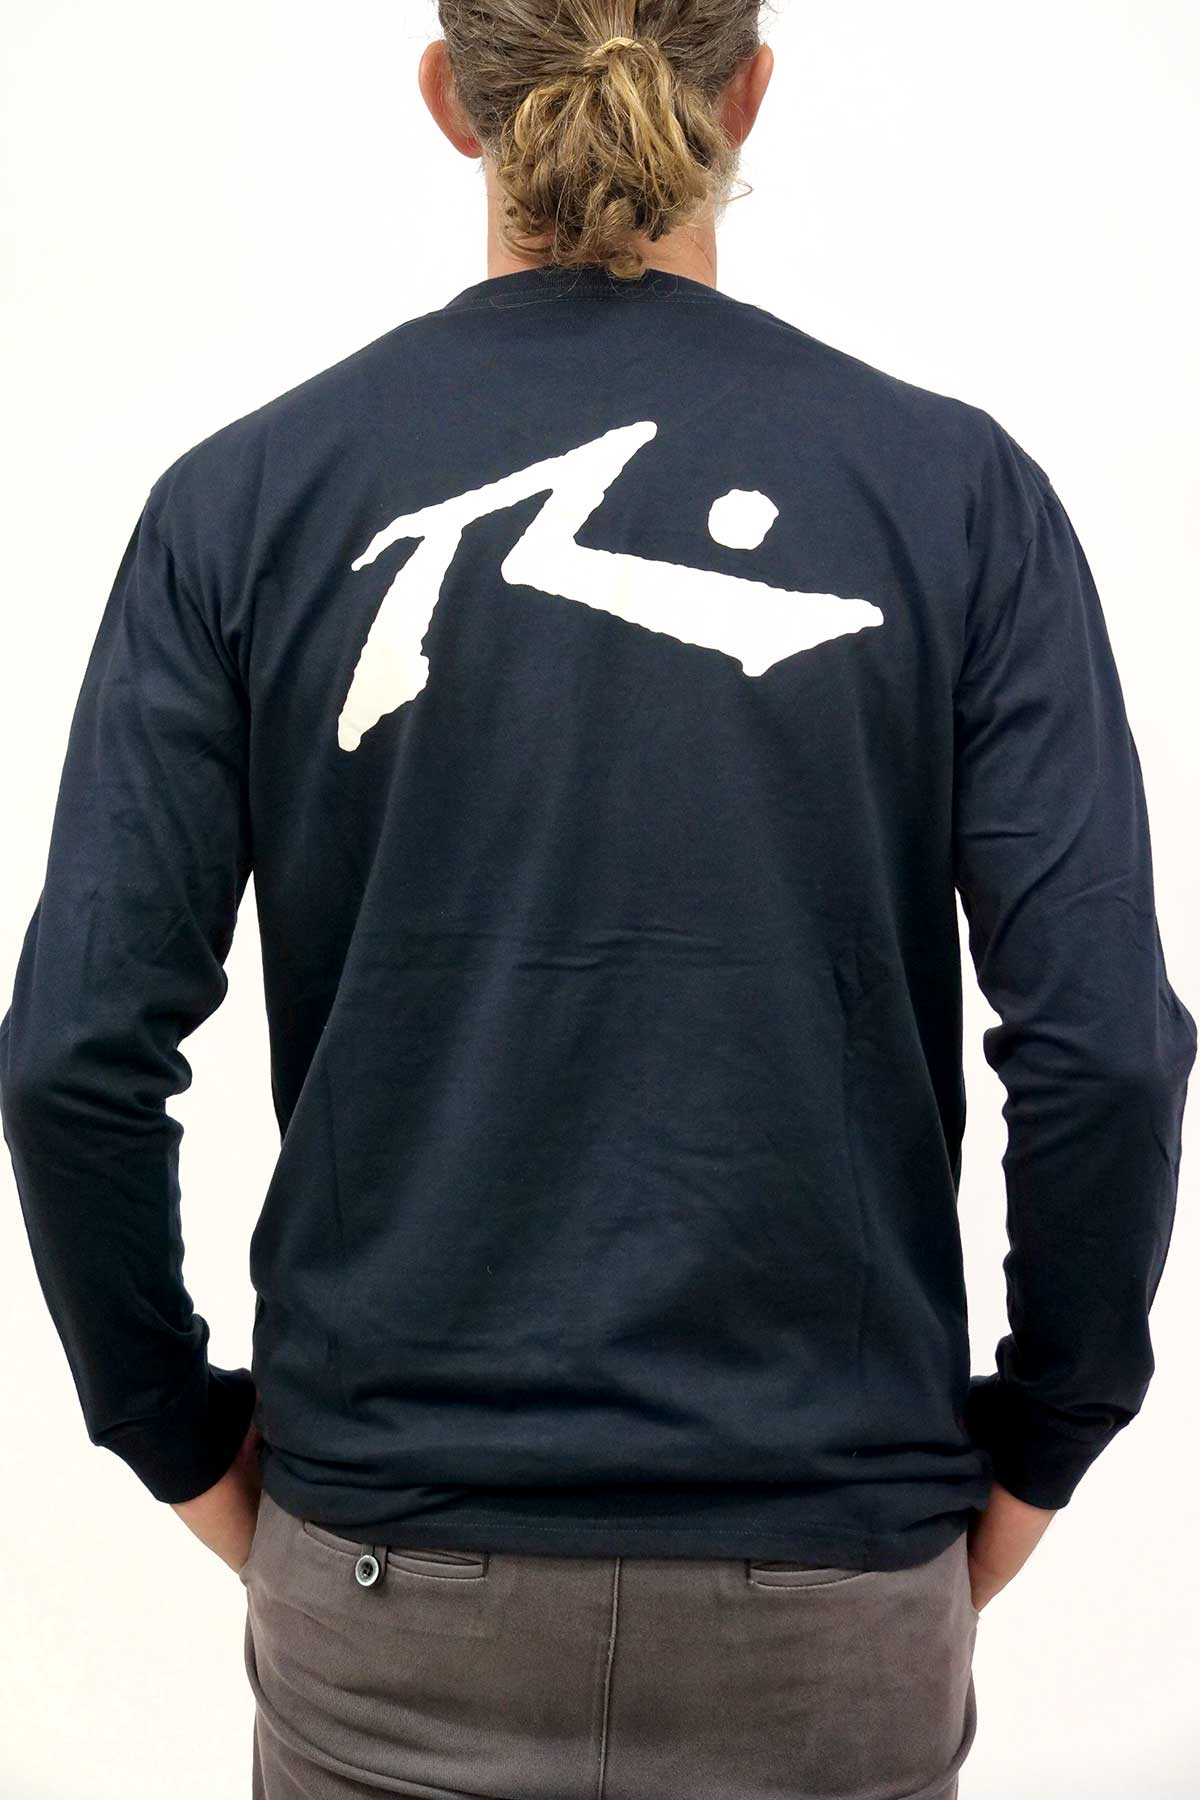 Rusty Tee - Competition LS Tshirt navy back